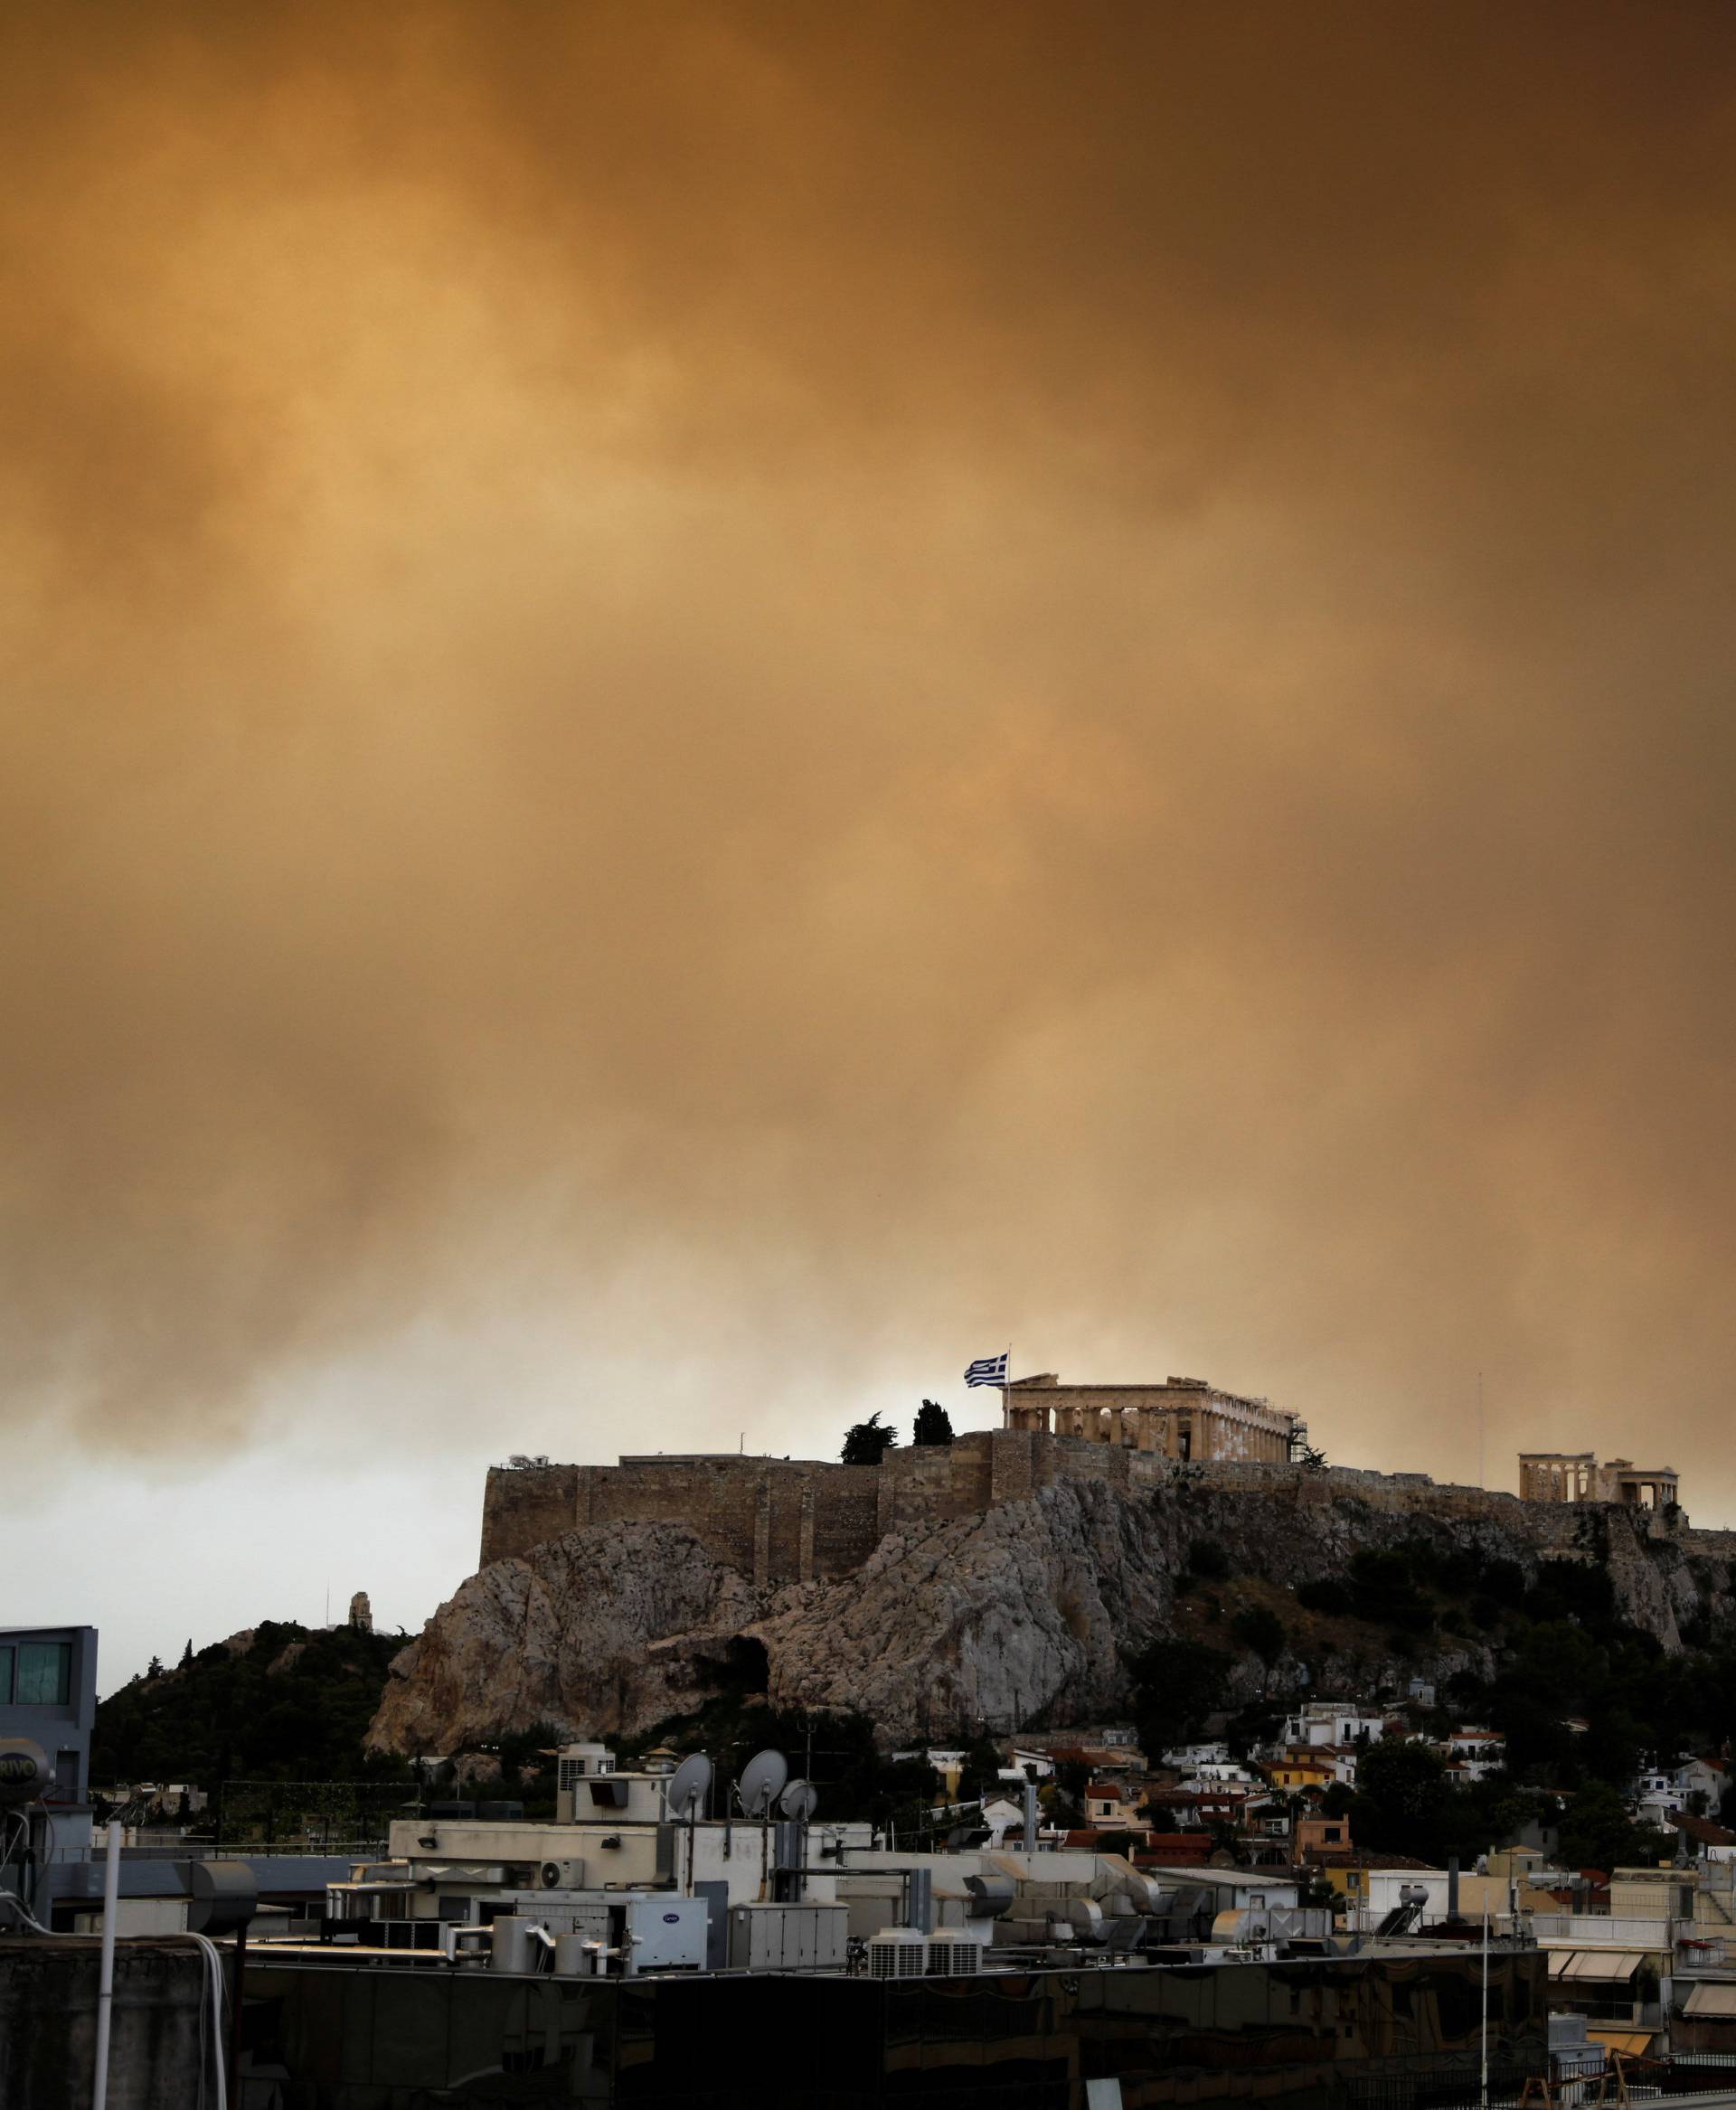 Smoke from a wildfire burning outside Athens is seen over the Parthenon temple atop the Acropolis hill in Athens